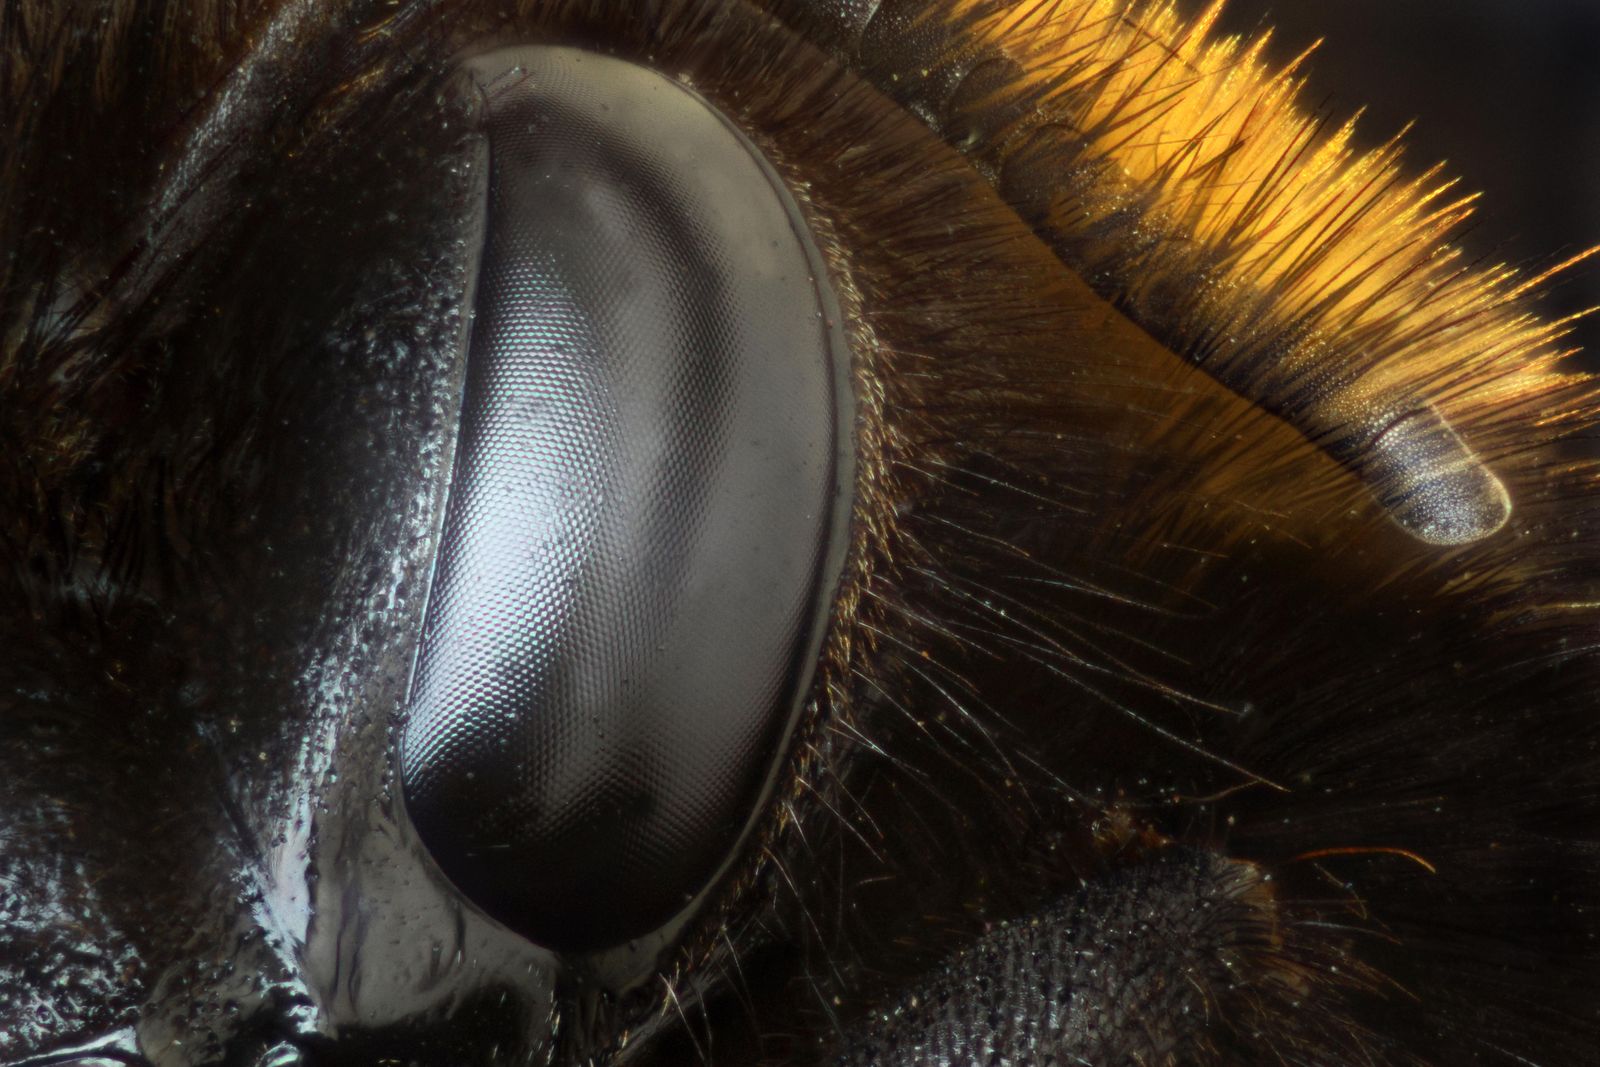 The eye of a Bee